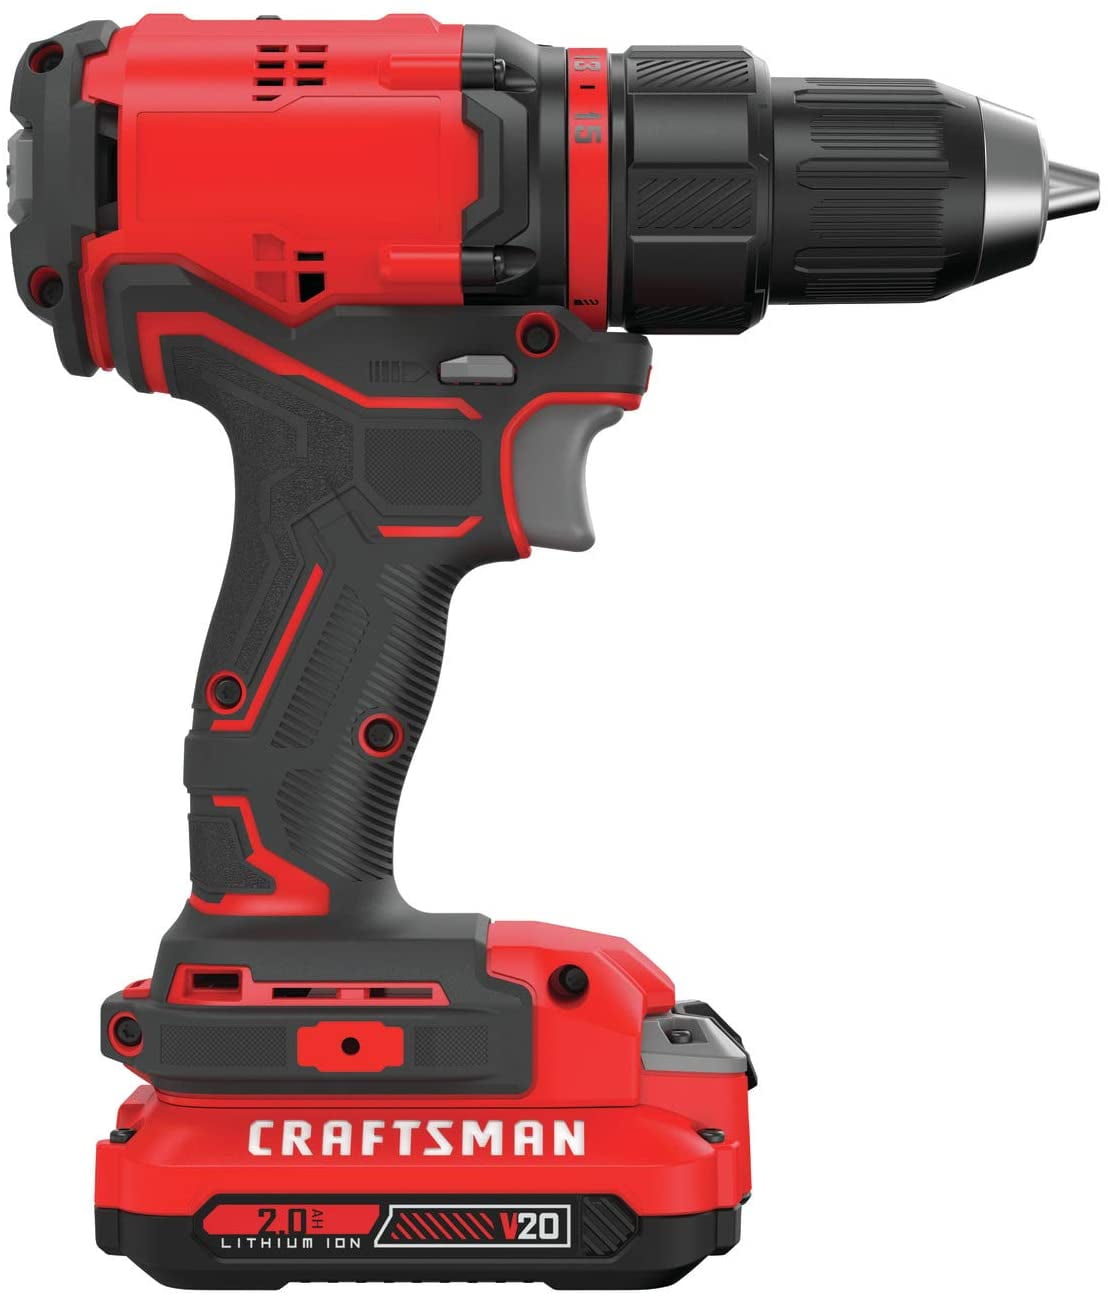 Craftsman CMCD720D2 V20 20 Volt Lithium-Ion Max 1/2 Inch Chuck Brushless Cordless  Drill/Driver (New Open Box)